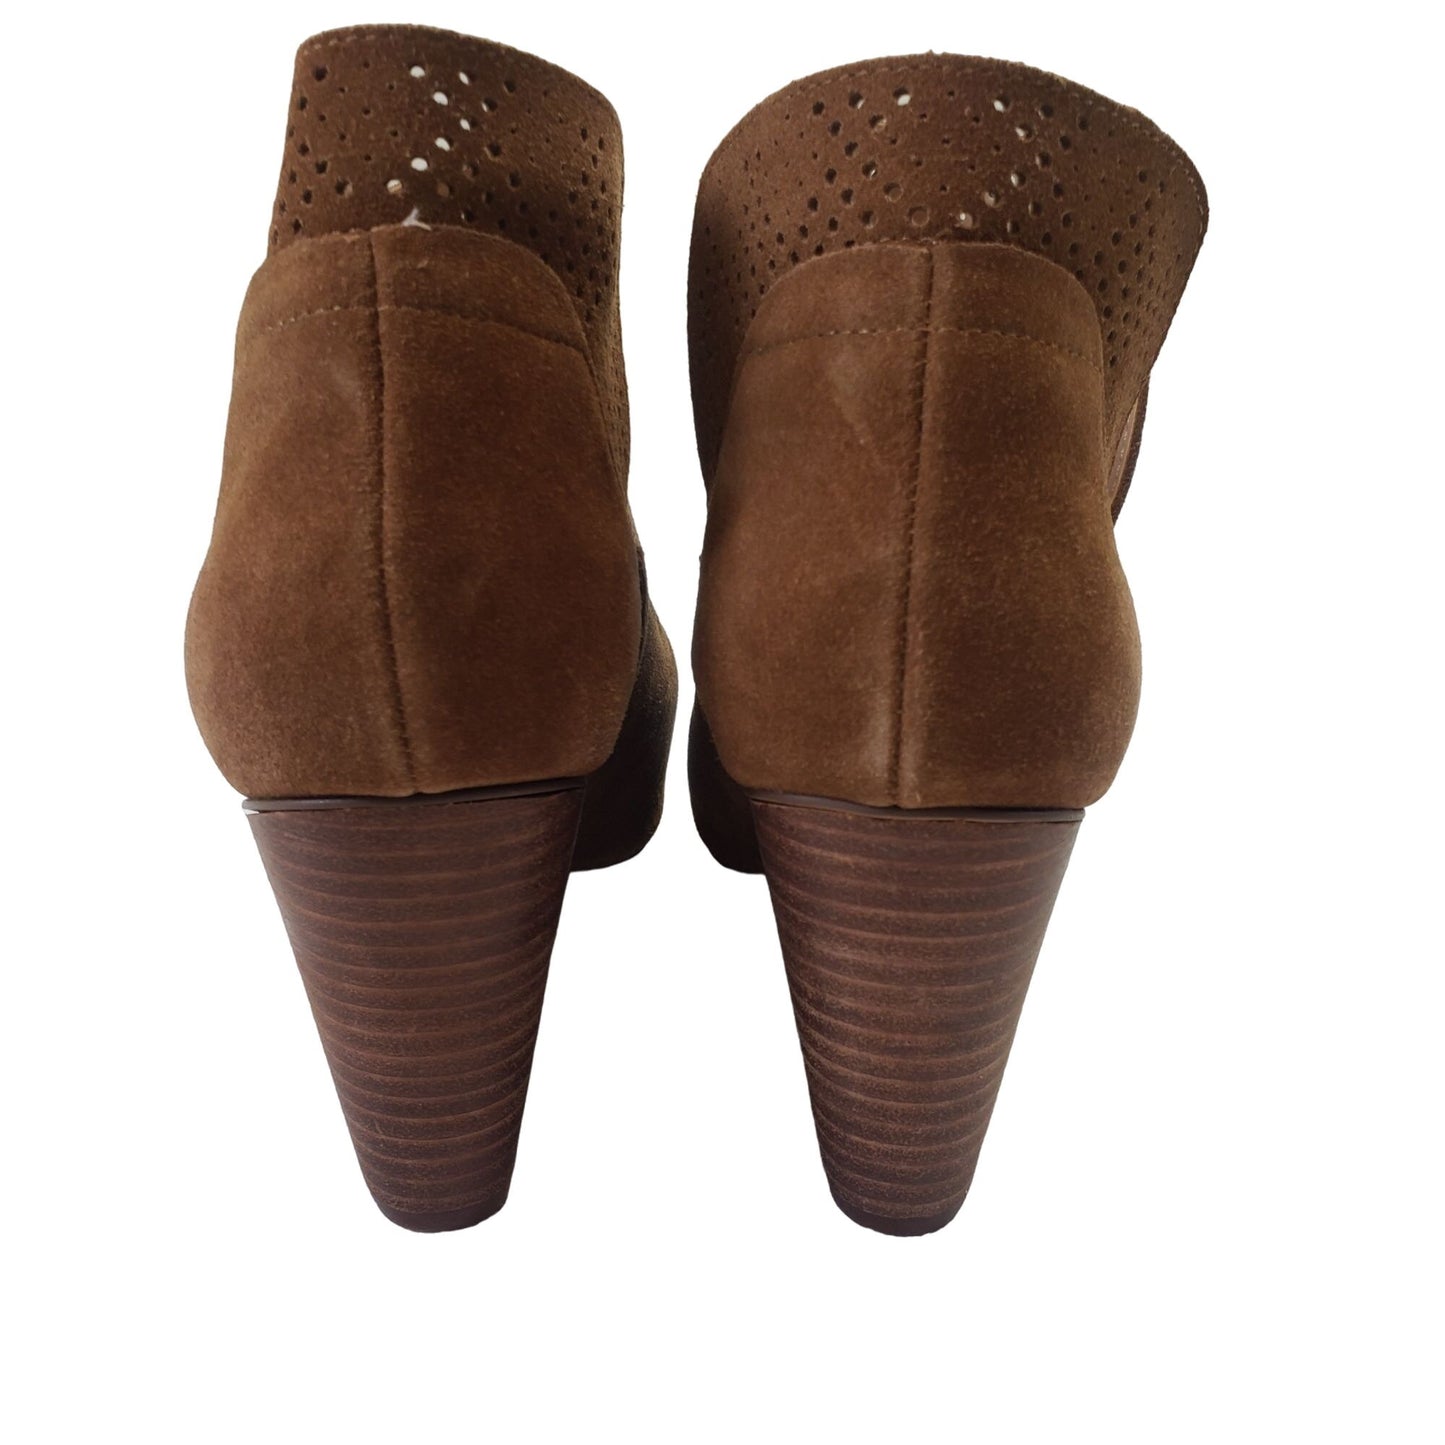 Steven by Steve Madden Ready Chestnut Suede Leather Ankle Booties Size 11